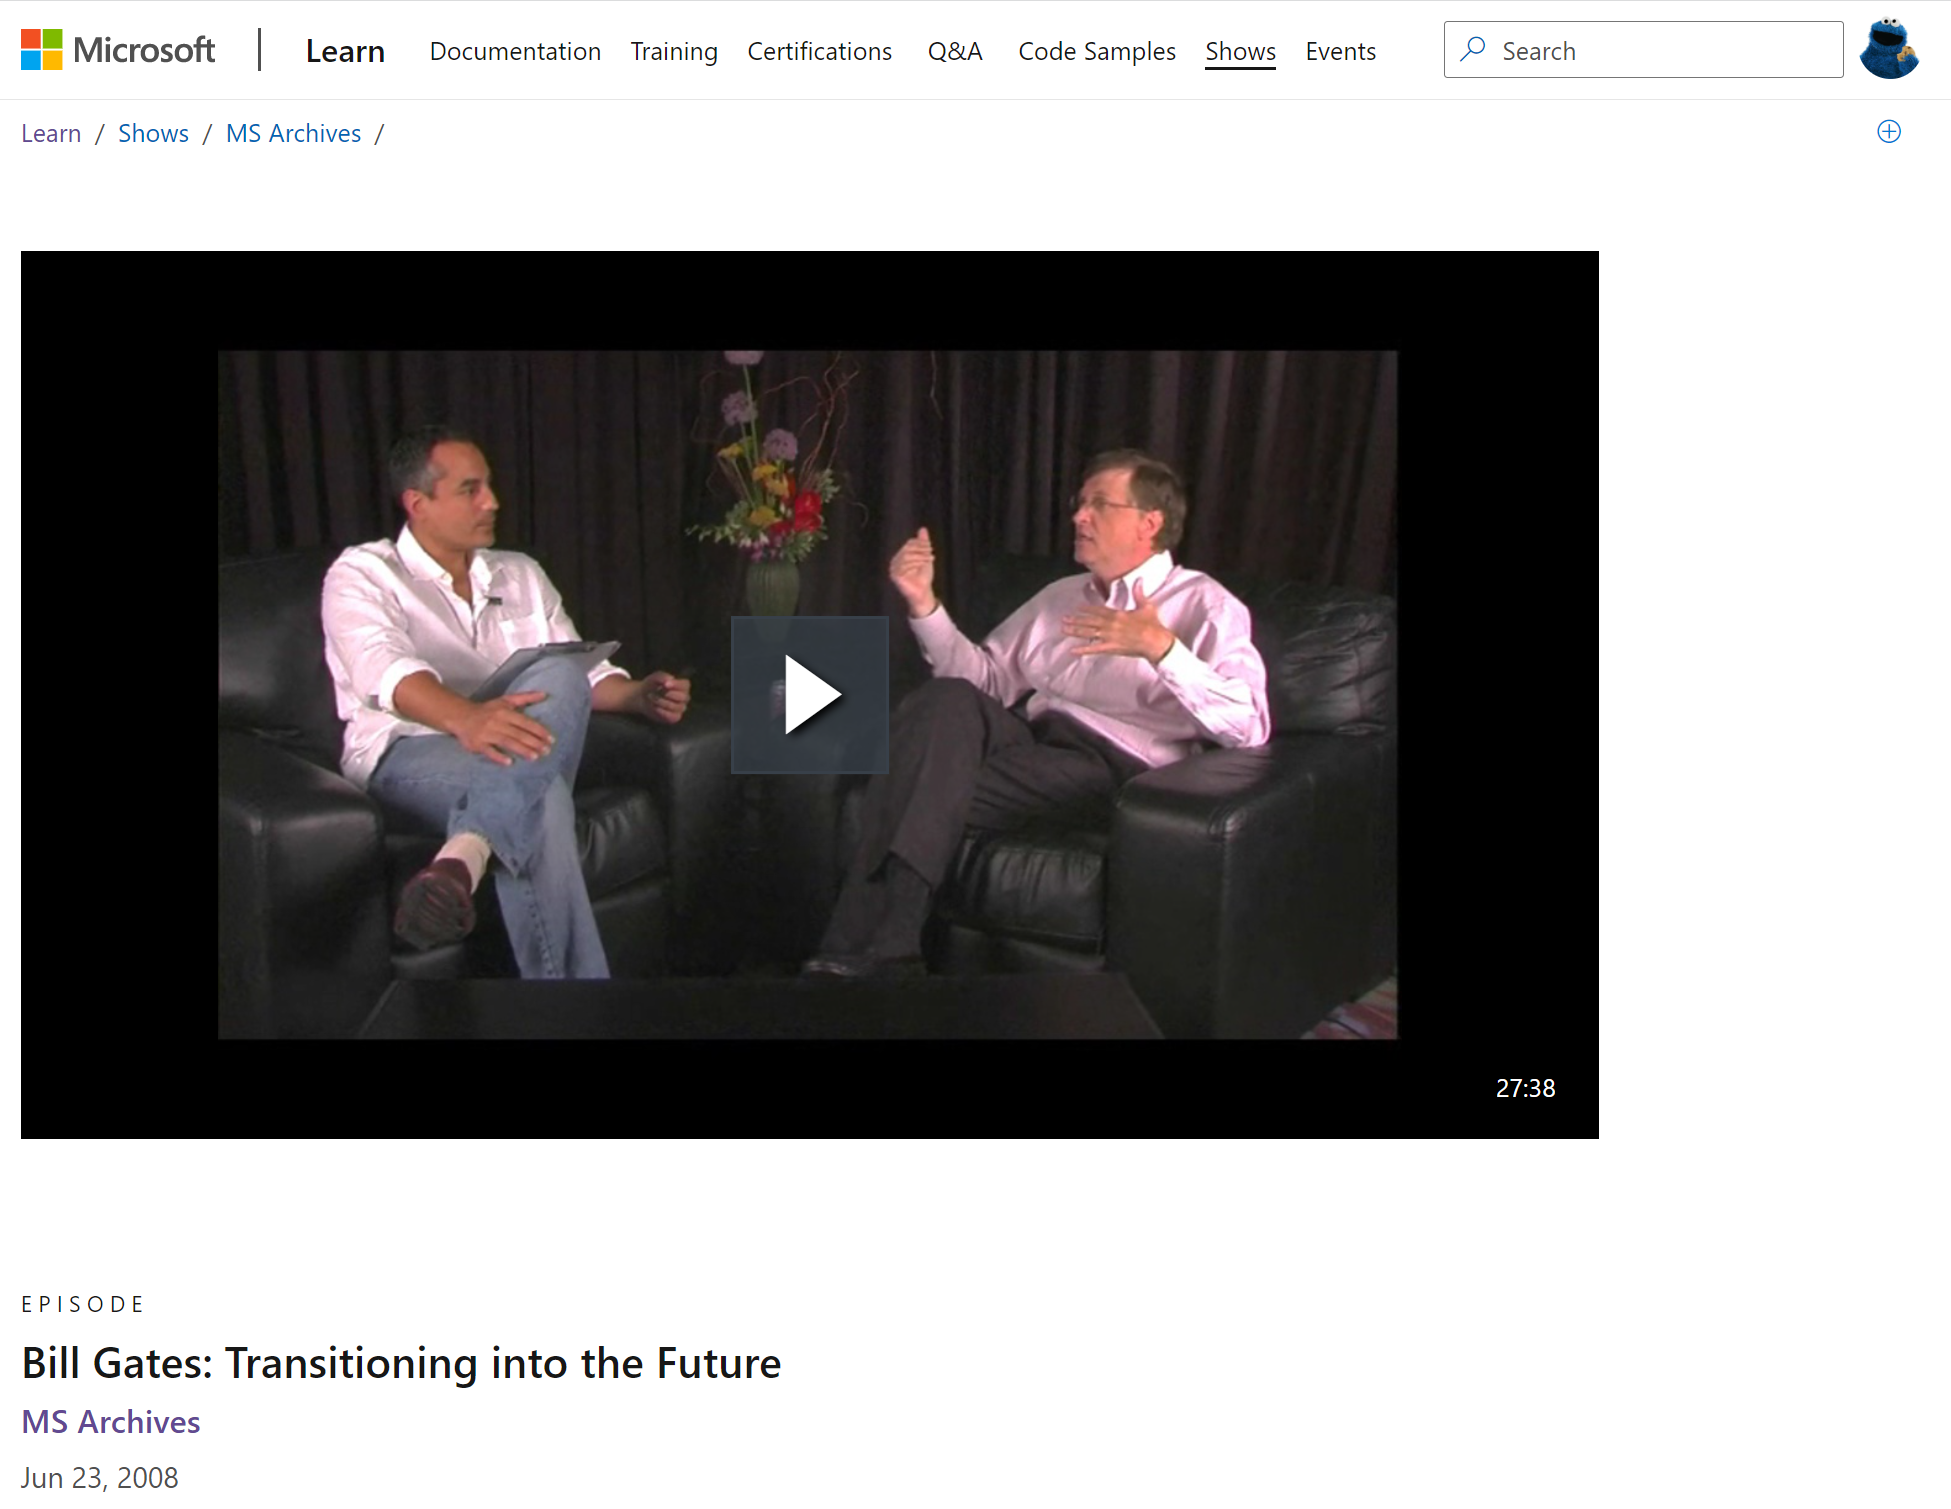 Screenshot of an episode from the MS Archives show where Bill Gates talks about transitioning into the future